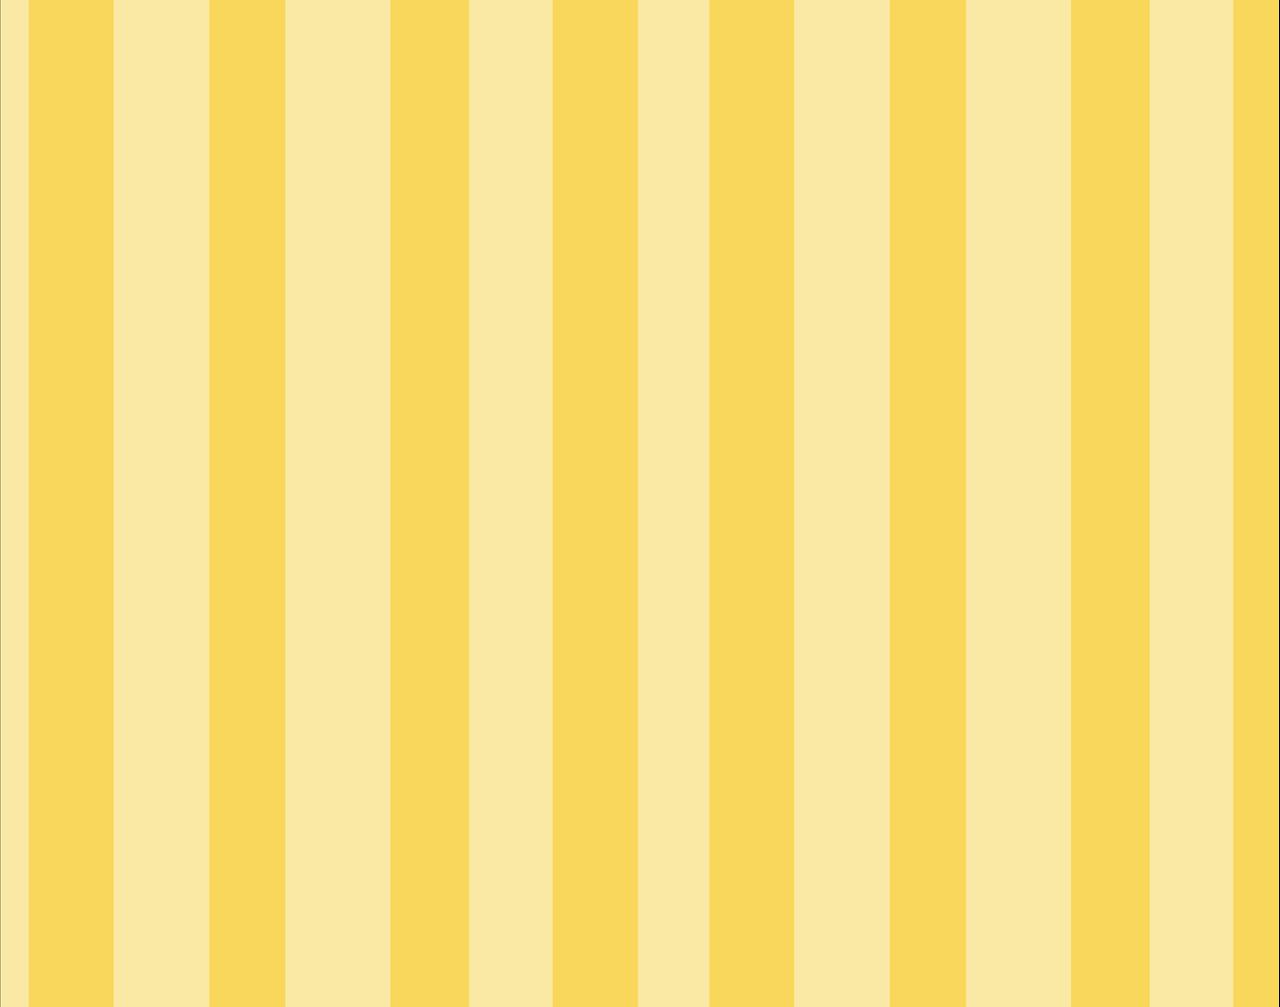 Yellow Color  Plain background images  Download Shiny yellow plain images